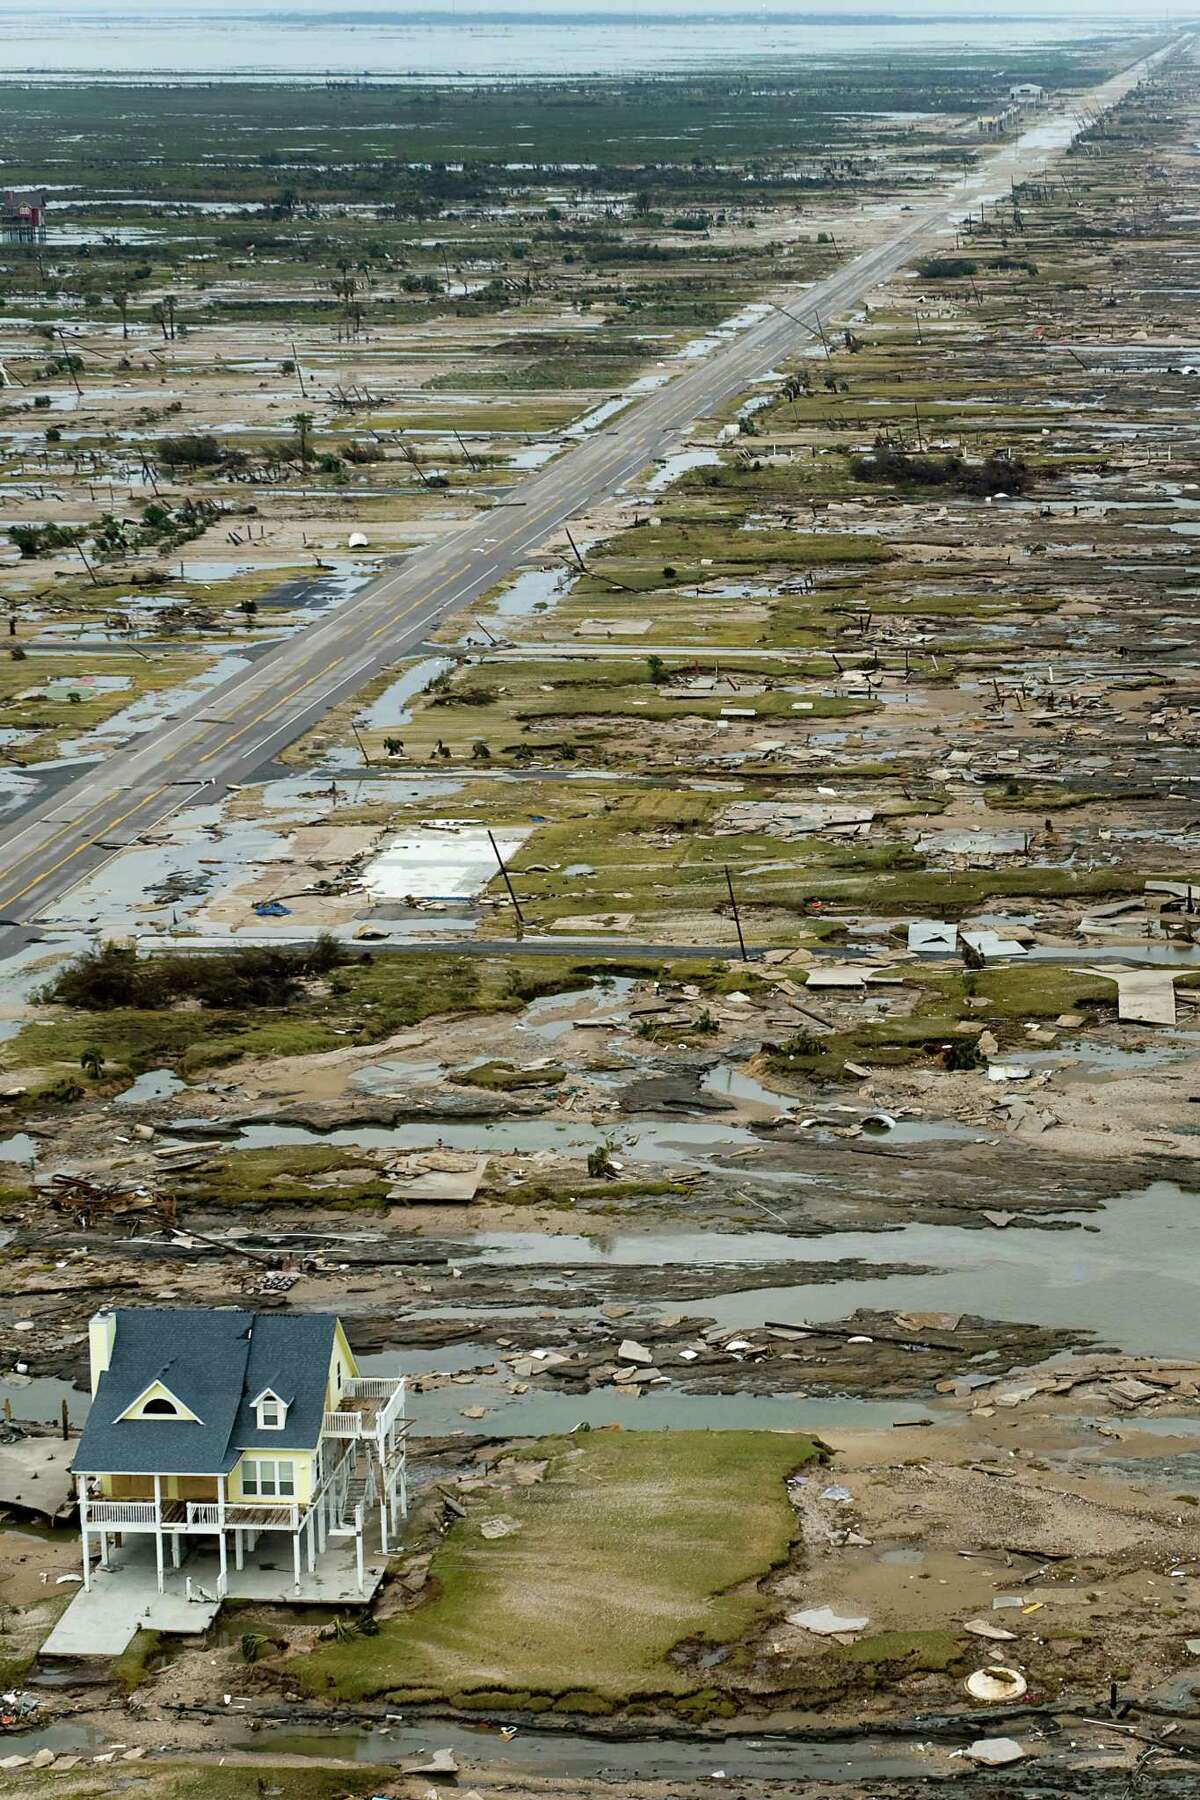 A single house is left standing amidst the devastation left by Hurricane Ike, Sunday, Sept. 14, 2008, in Gilchrist, Texas. ( Smiley N. Pool / Chronicle ) Warren and Pam Adams house is left standing amidst the devastation left by Hurricane Ike in Gilchrist.